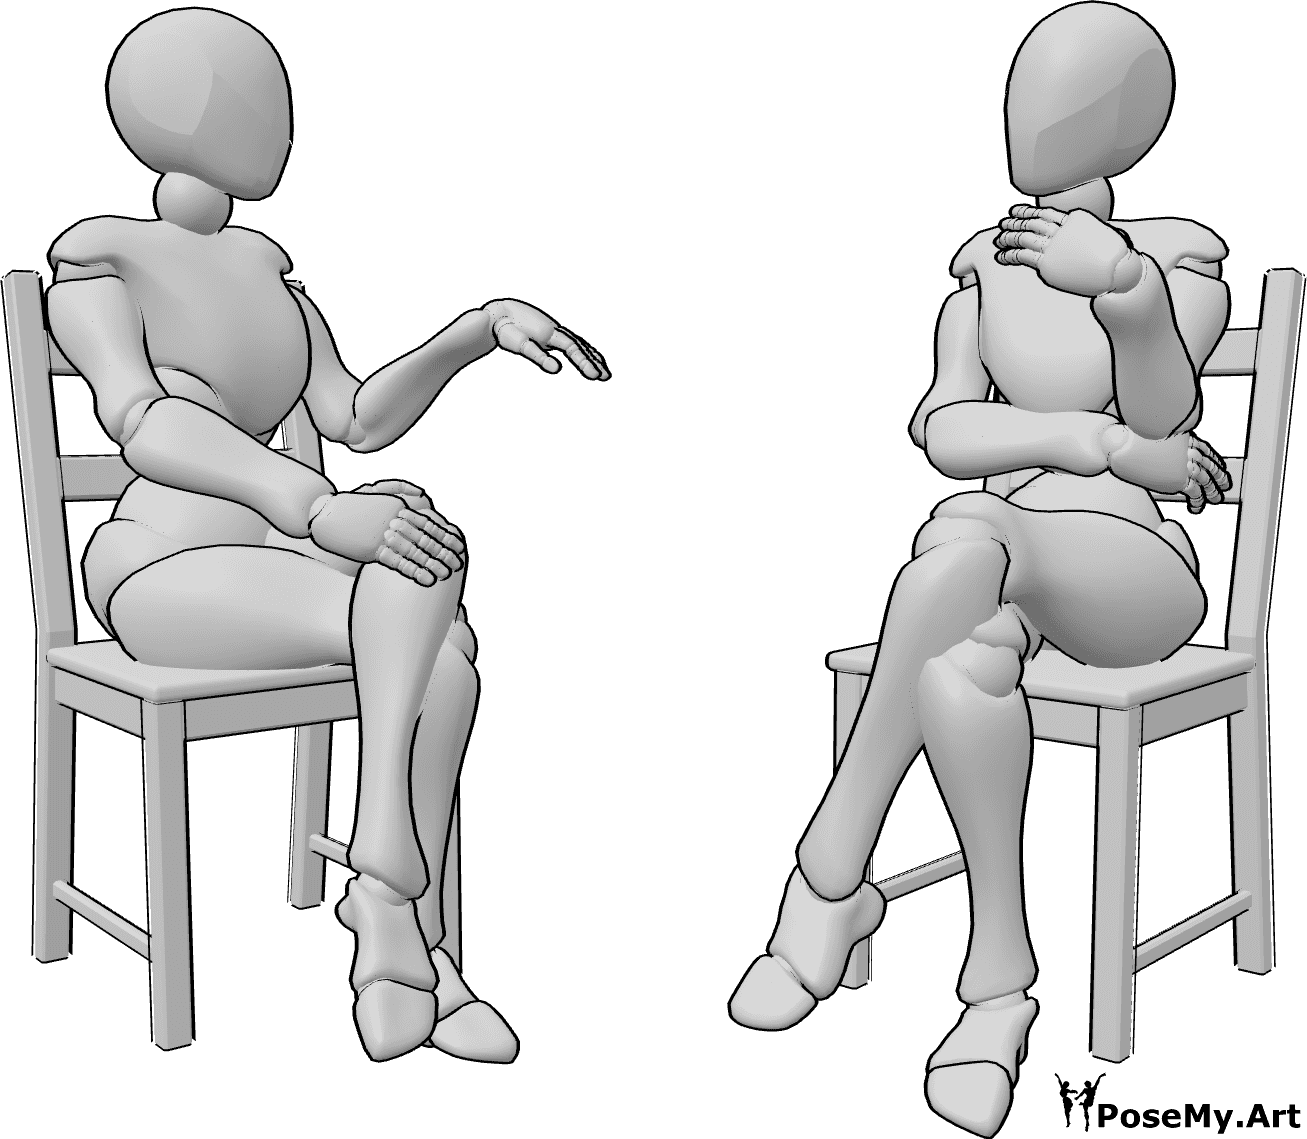 Pose Reference- Two females gossiping conversation pose - Two females are sitting on chairs and talking, gossiping, having a conversation